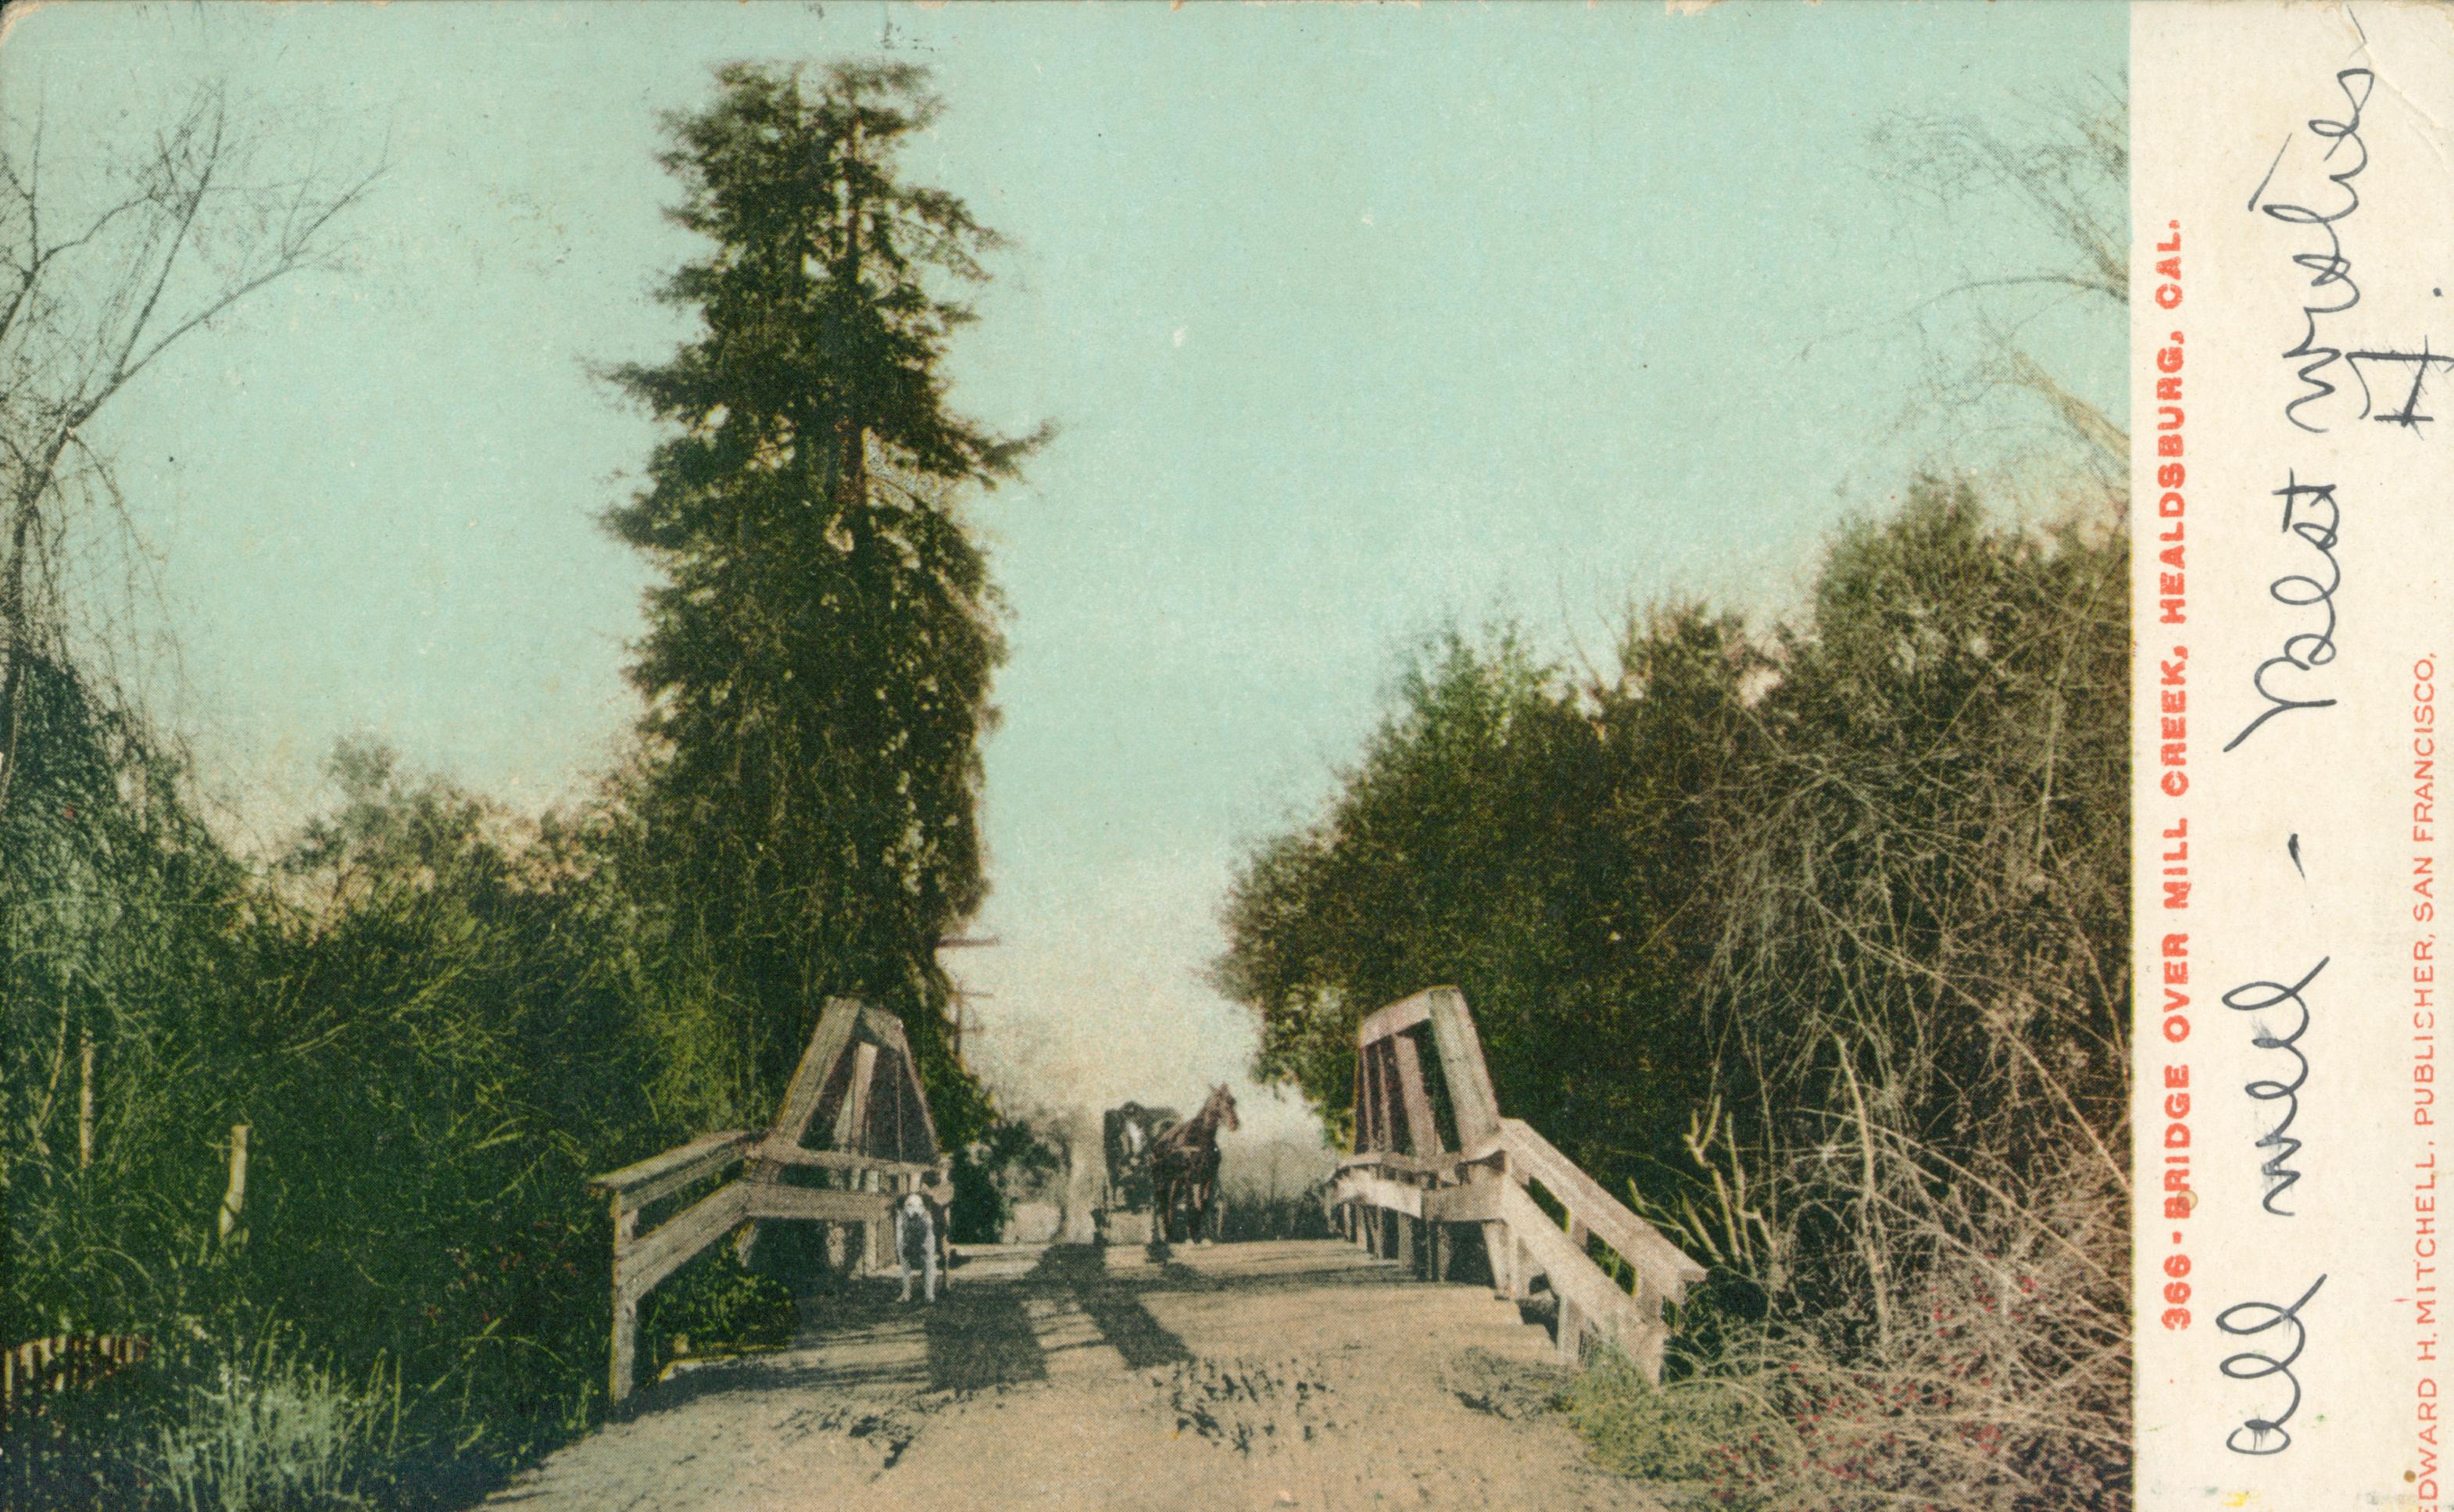 Shows a horse and carriage crossing a bridge